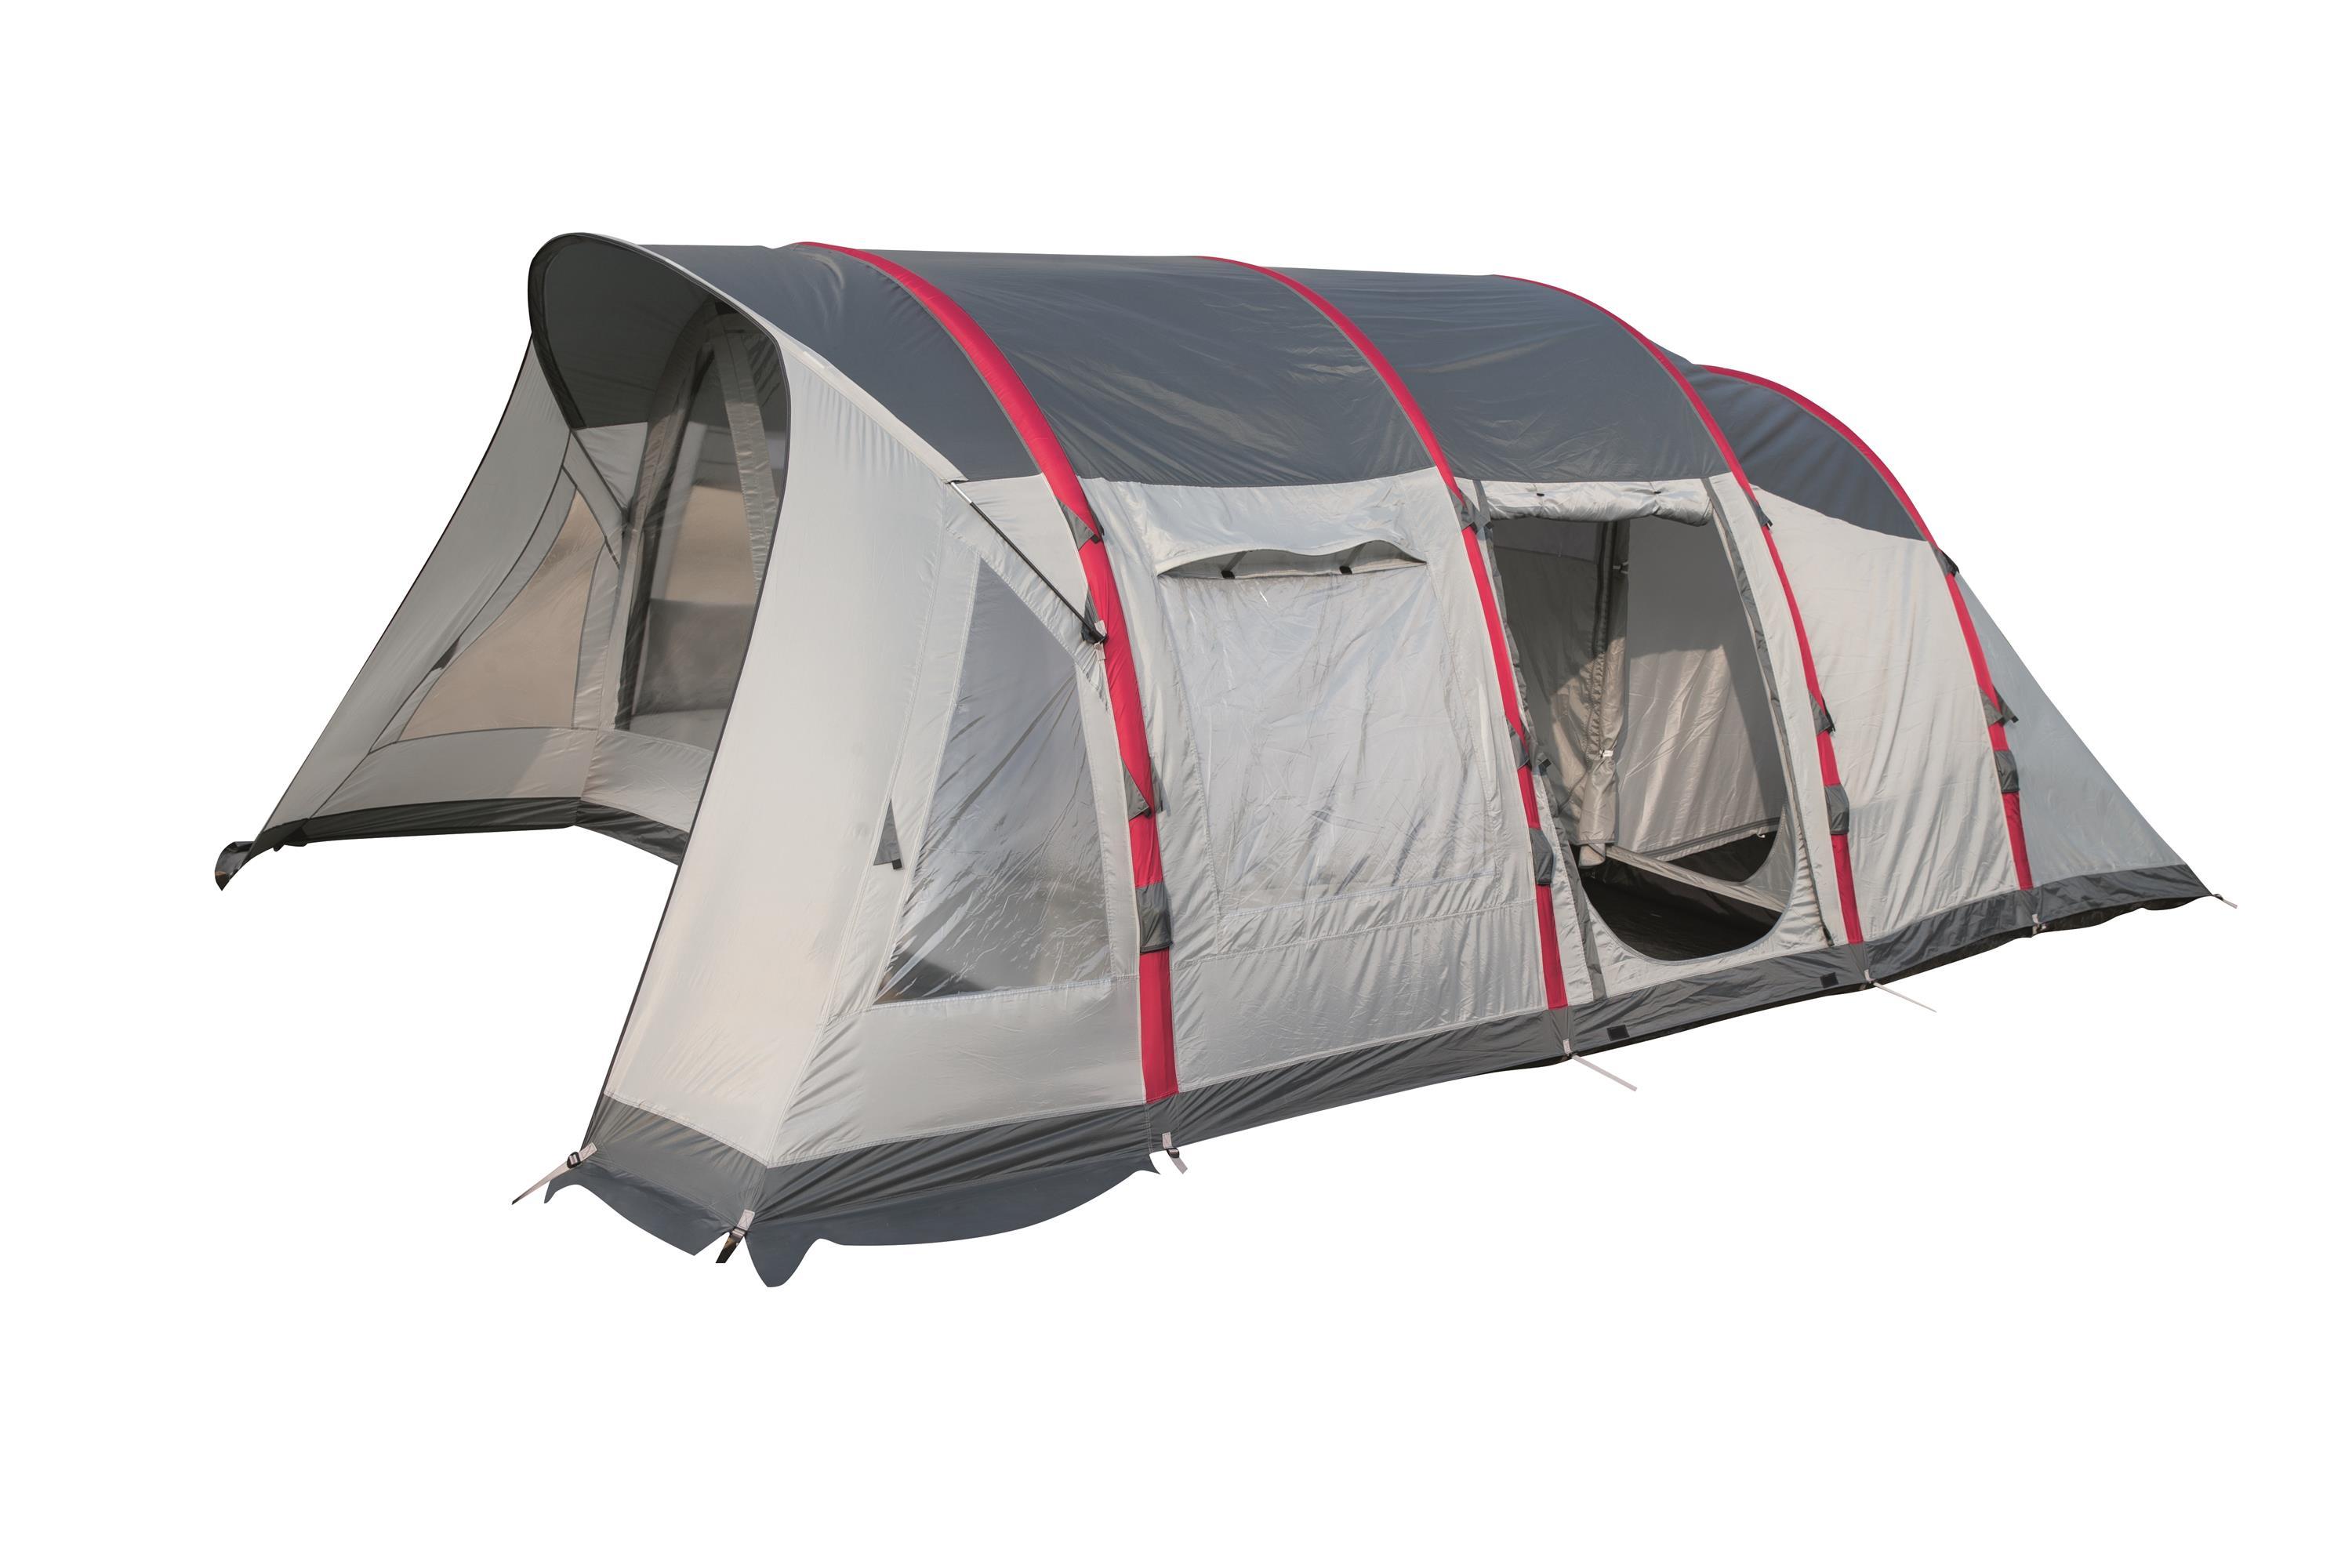 Six-person inflatable tent